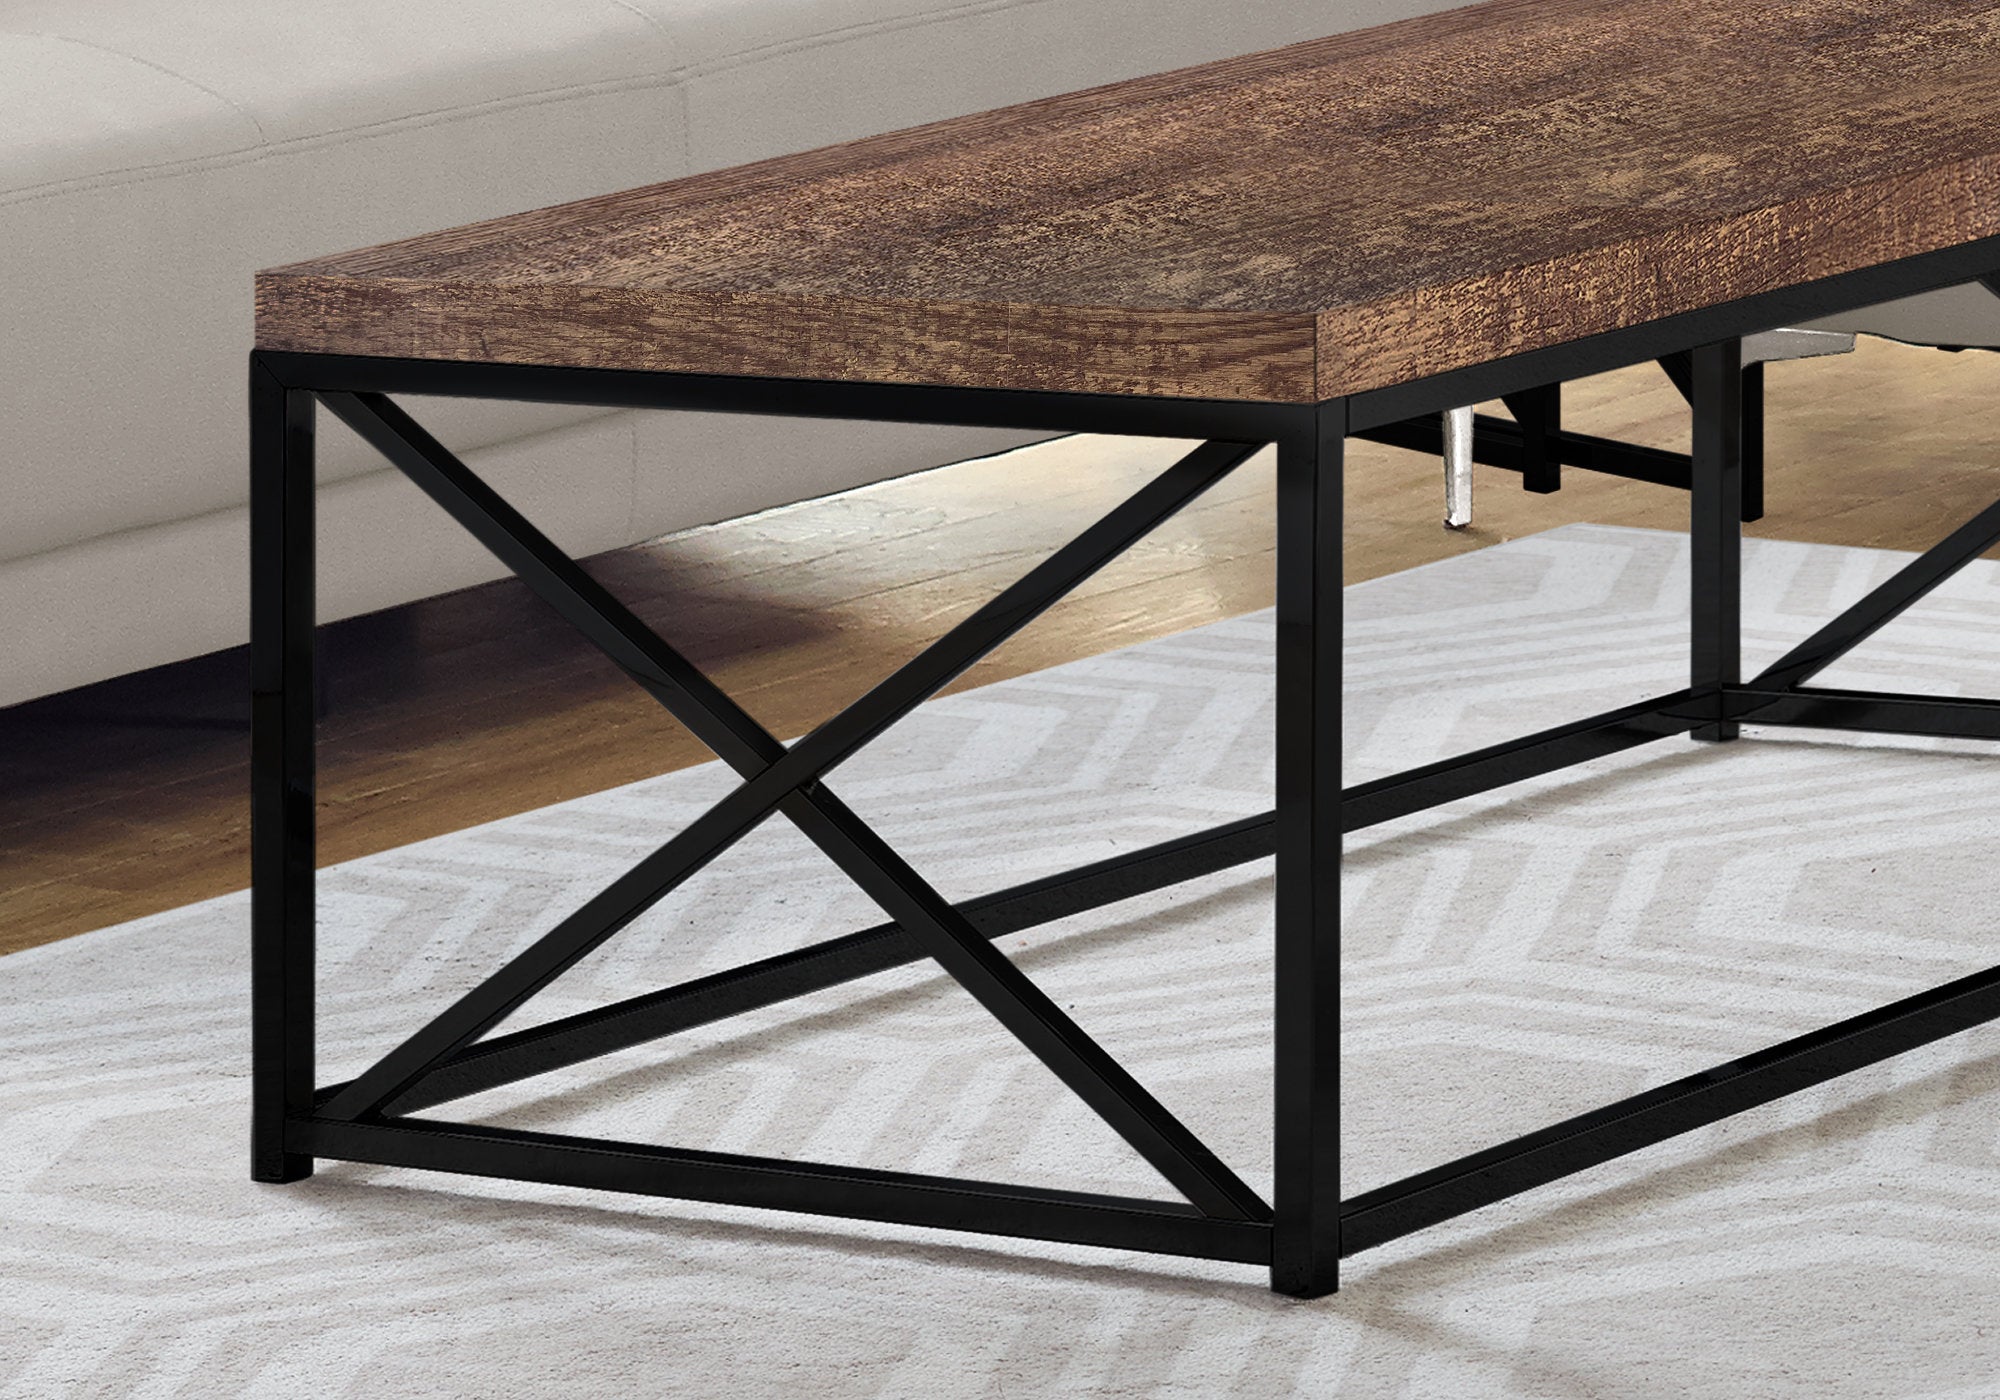 MN-553416    Coffee Table, Accent, Cocktail, Rectangular, Living Room, Metal Frame, Laminate, Brown Reclaimed Wood Look, Black, Contemporary, Modern